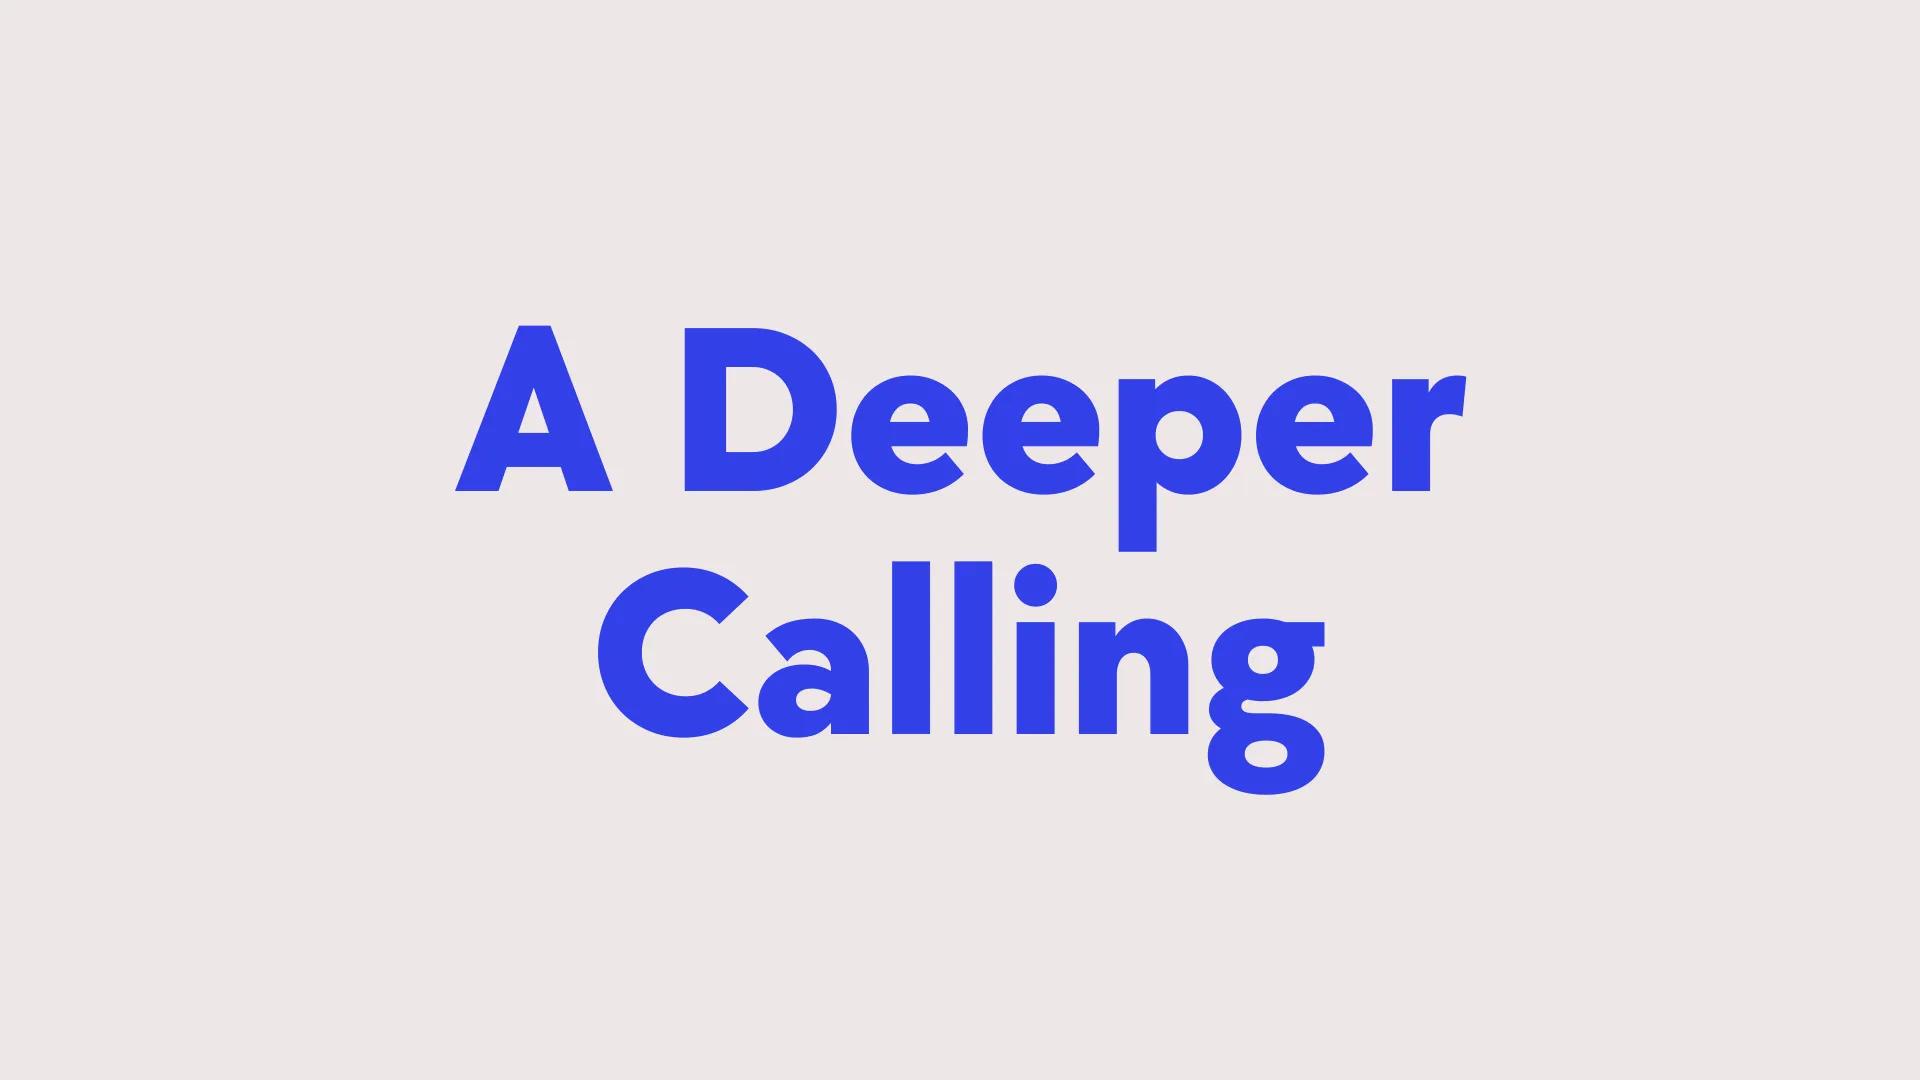 A simple image that says "a deeper calling"